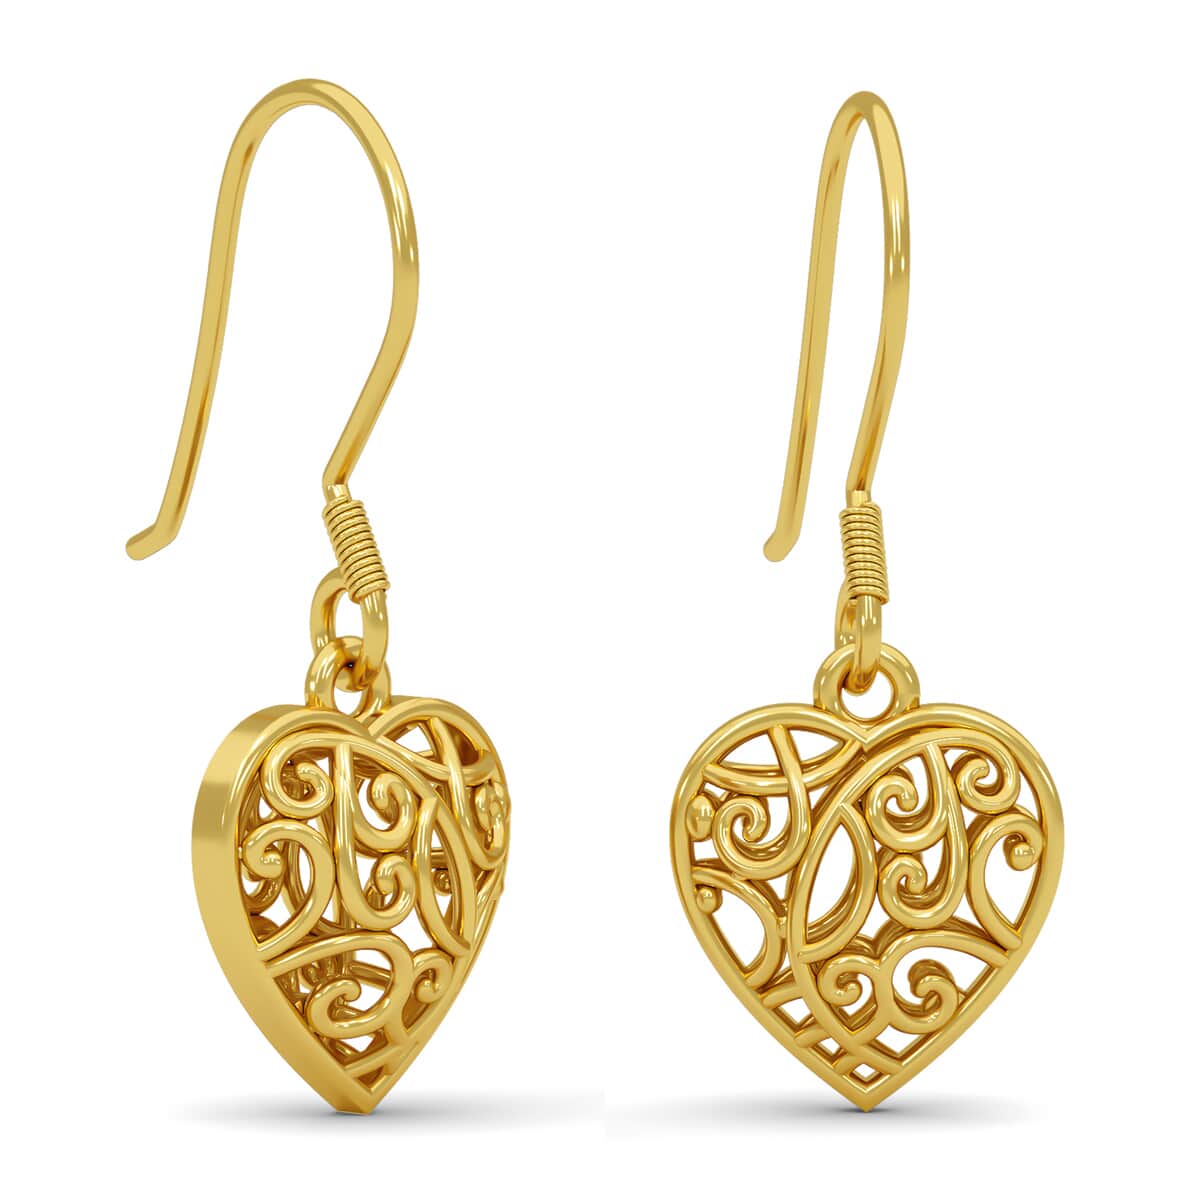 Mother’s Day Gift Openwork Drop Dangle Earrings in 14K Yellow Gold Plated Sterling Silver, Filigree Heart Earrings, Dangle Silver Earrings For Women image number 5